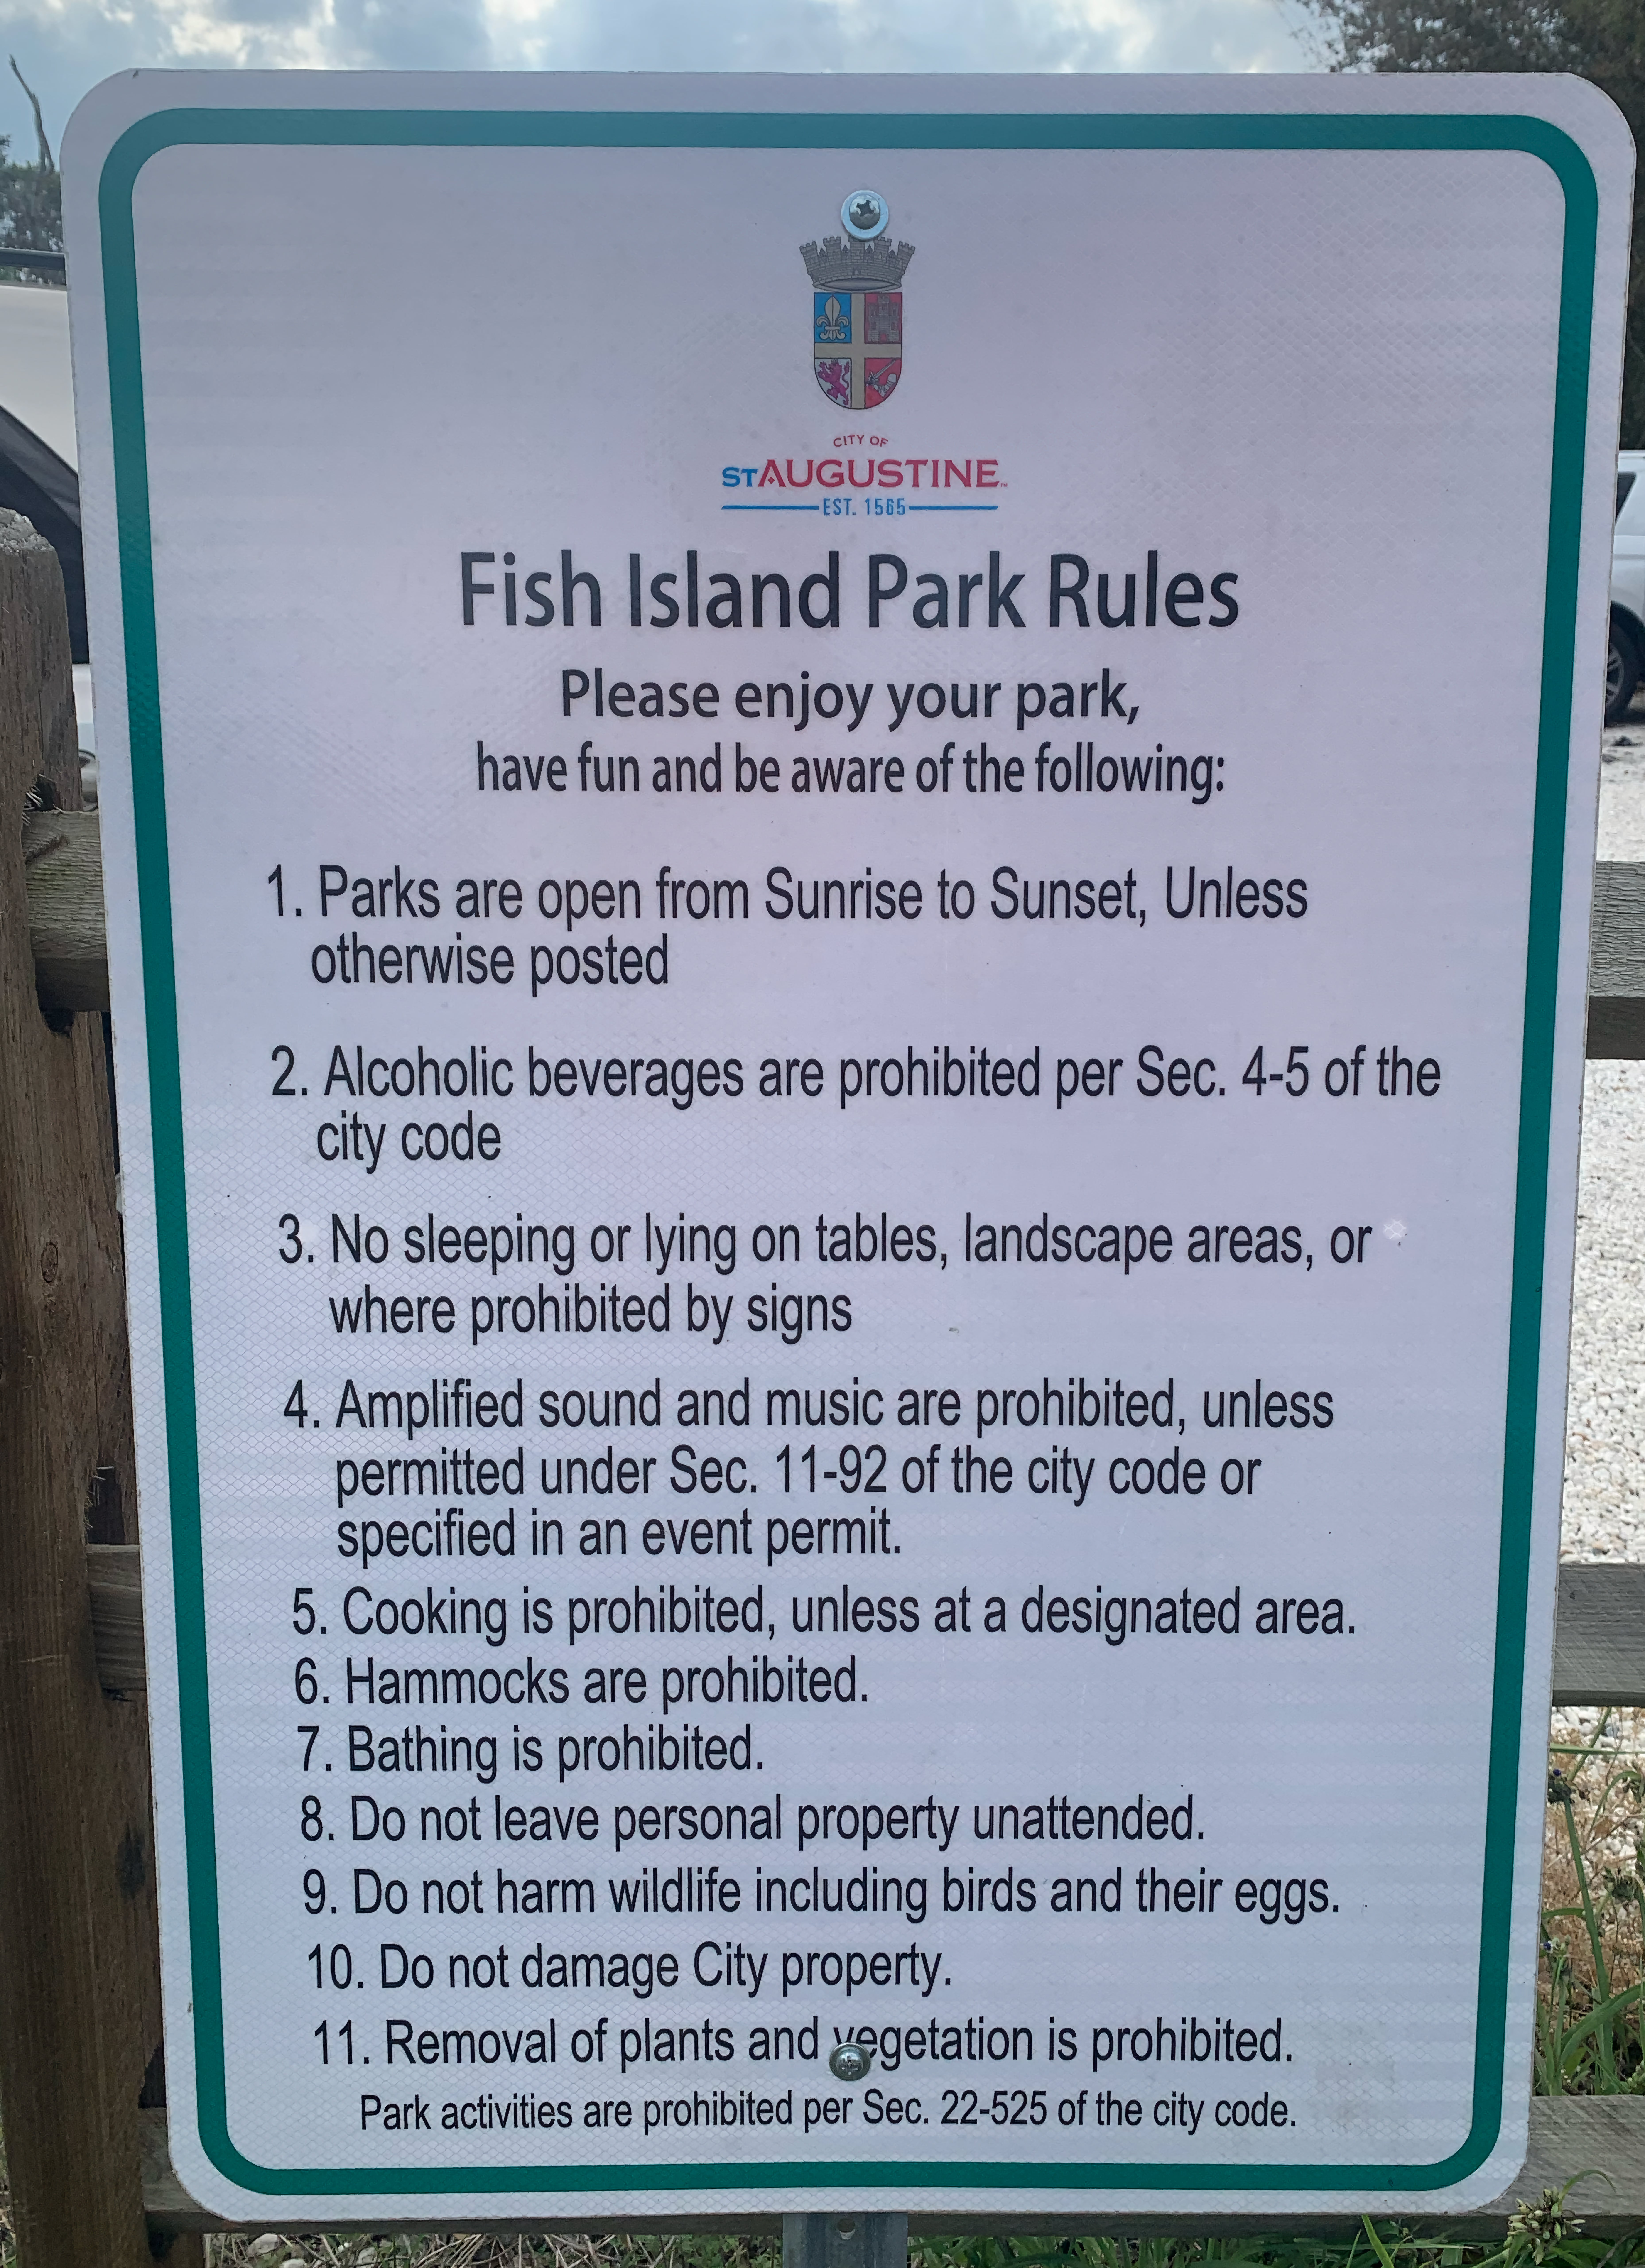 Park Rules for Fish Island provided by the city of St. Augustine